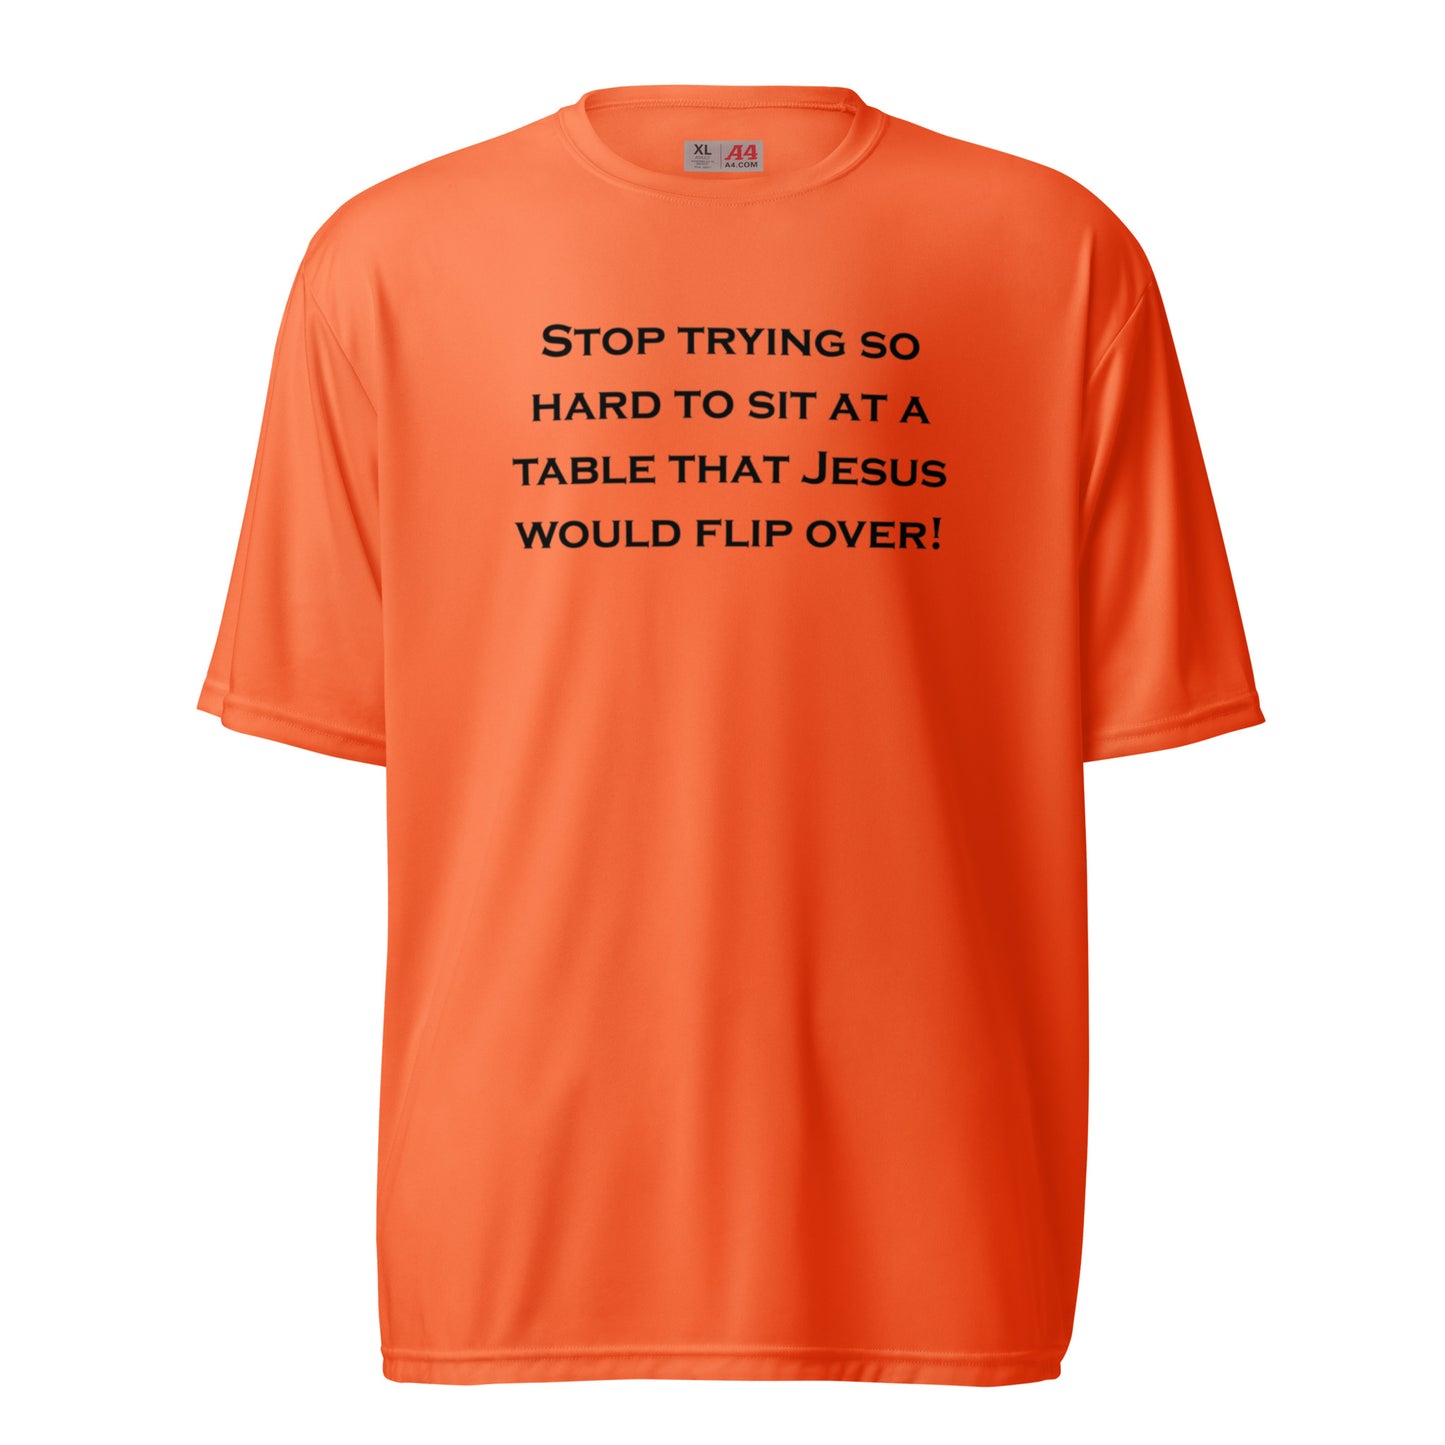 Stop Trying So Hard To Sit At a Table unisex performance crew neck t-shirt - Black Print